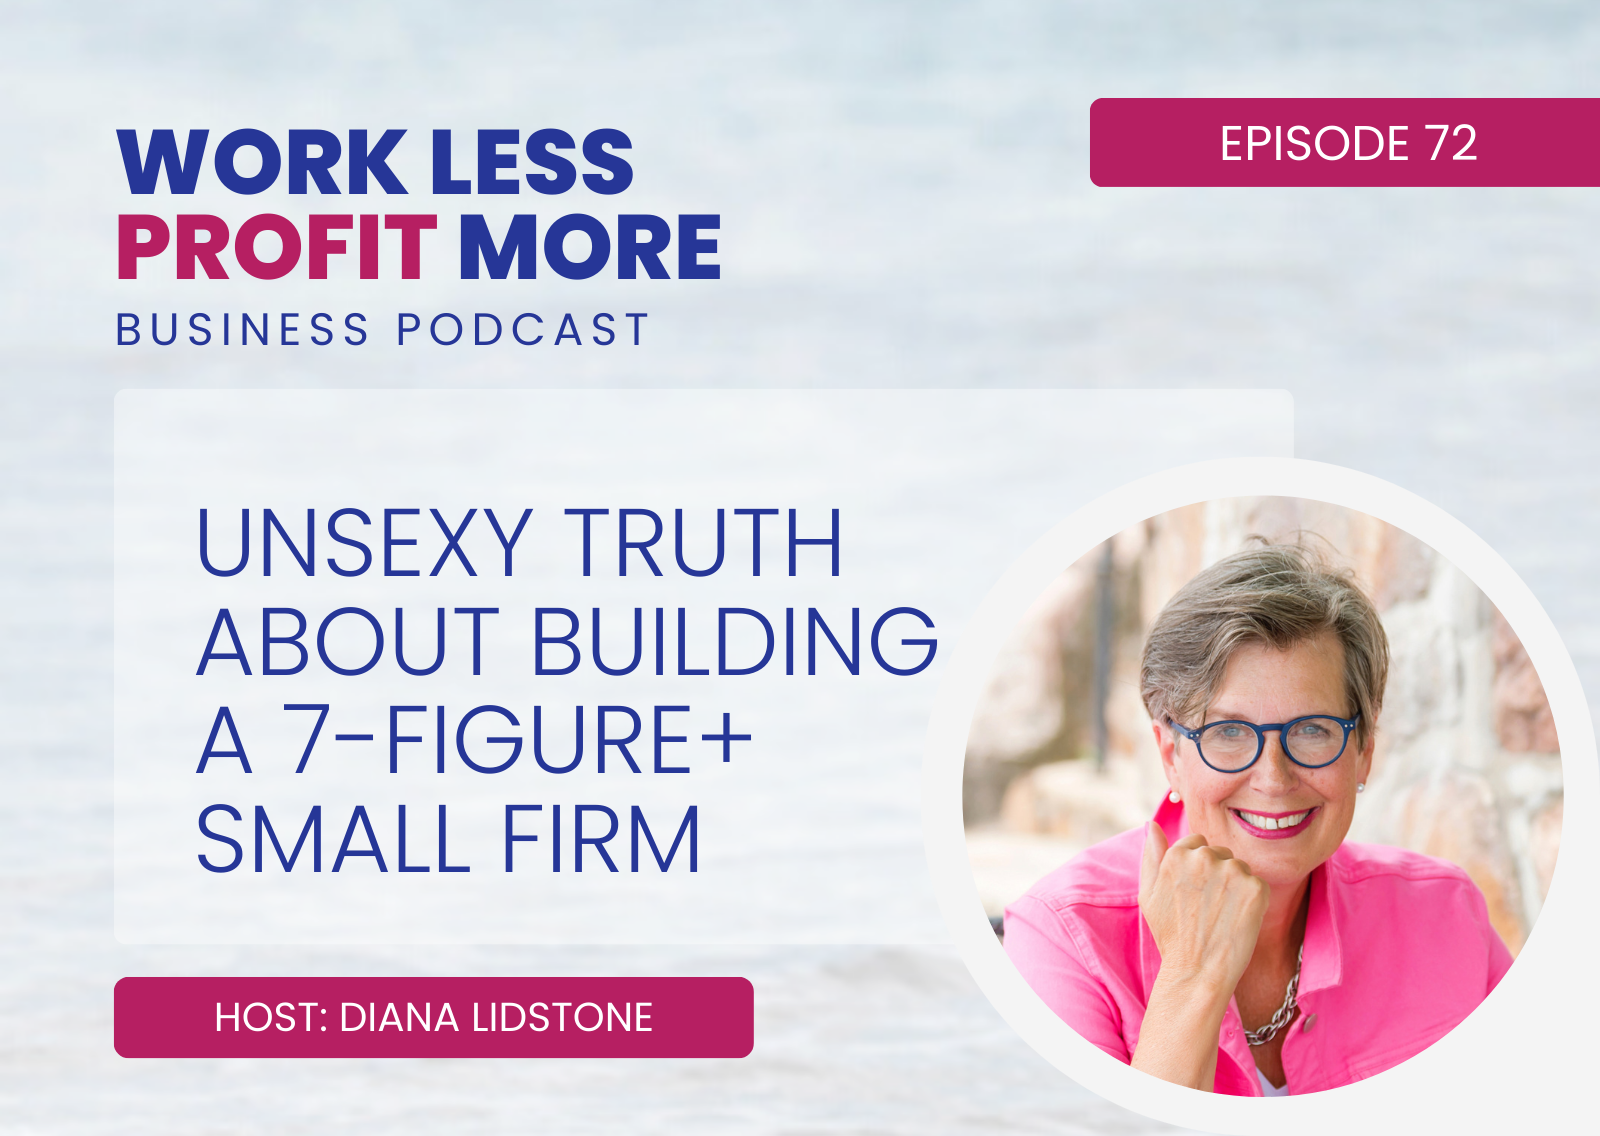 Unsexy Truth About Building A 7-Figure+ Small Firm